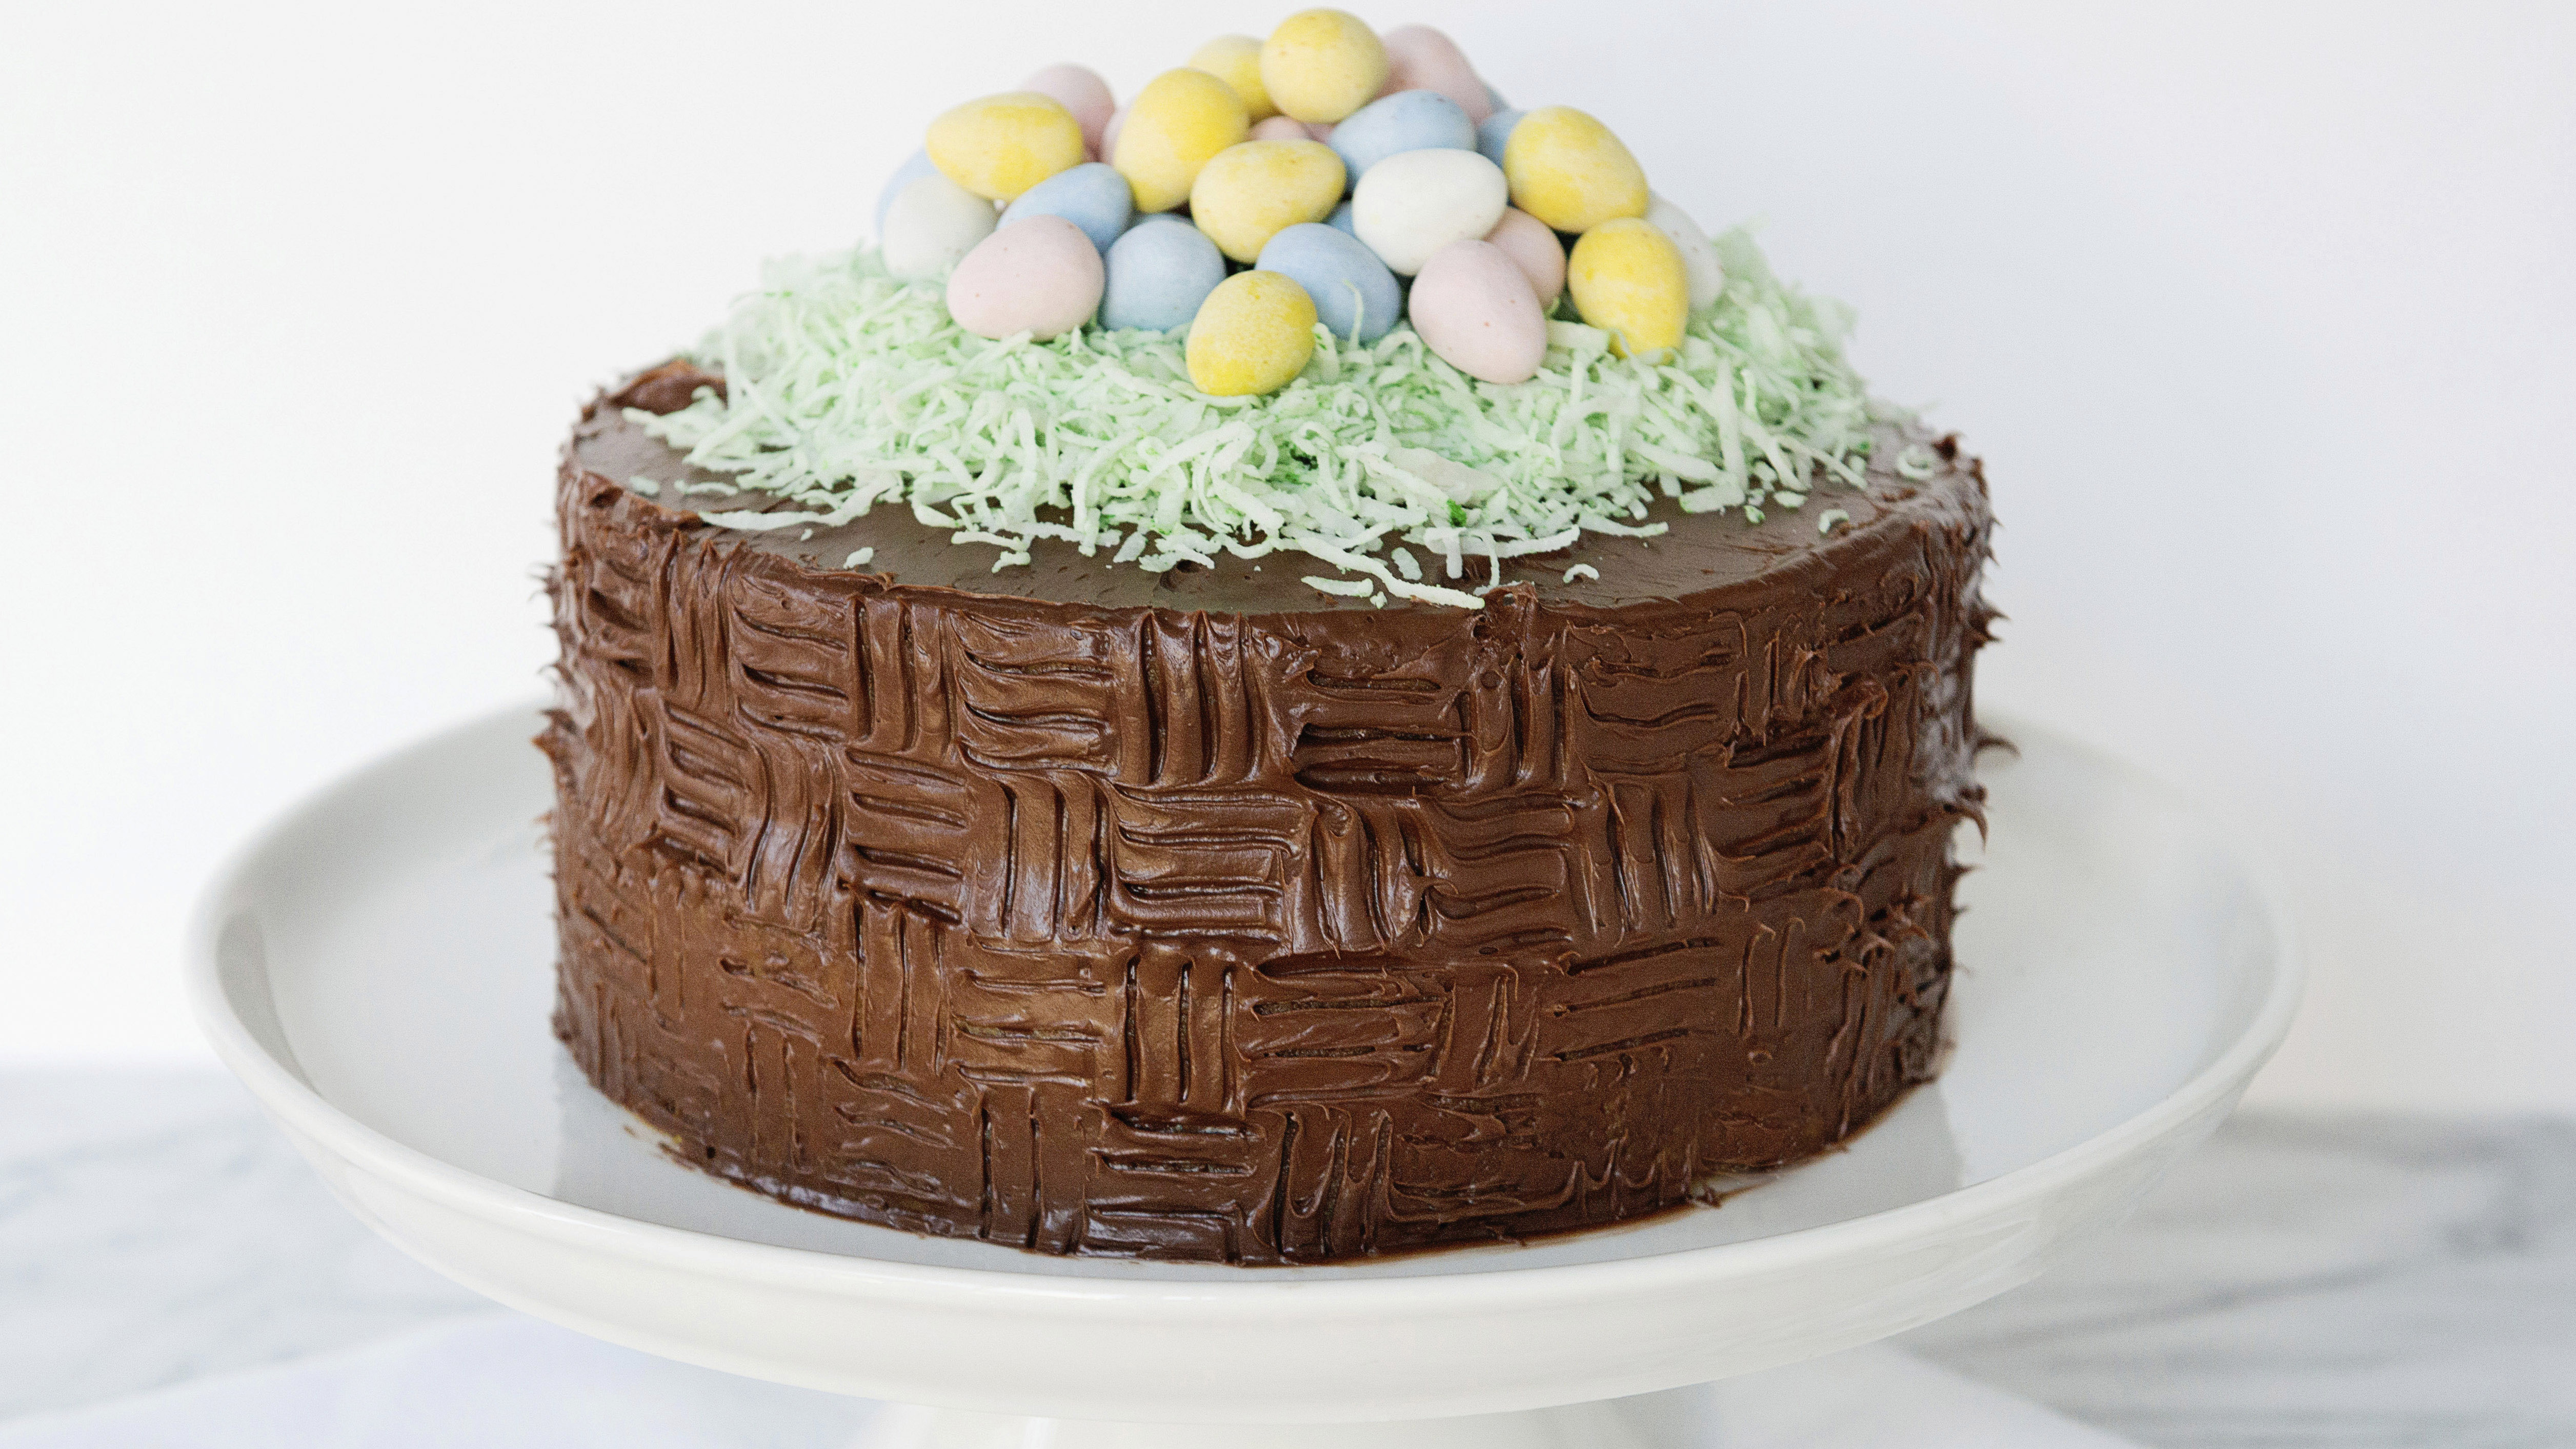 Swirled Easter Cake with Buttercream Frosting - The Country Cook